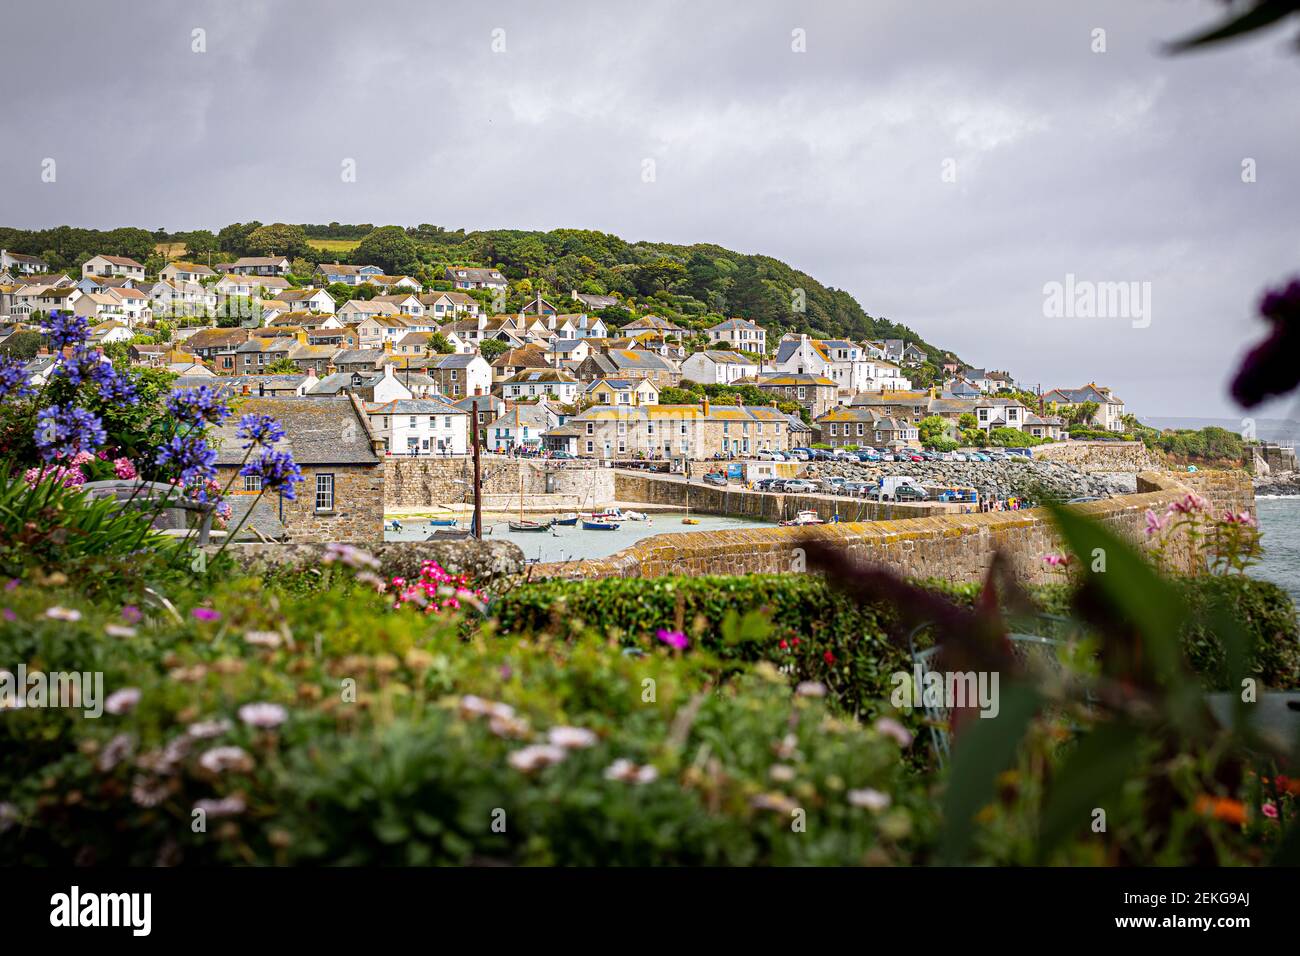 A view of Mousehole from a seaside garden, Cormwall, United Kingdom Stock Photo